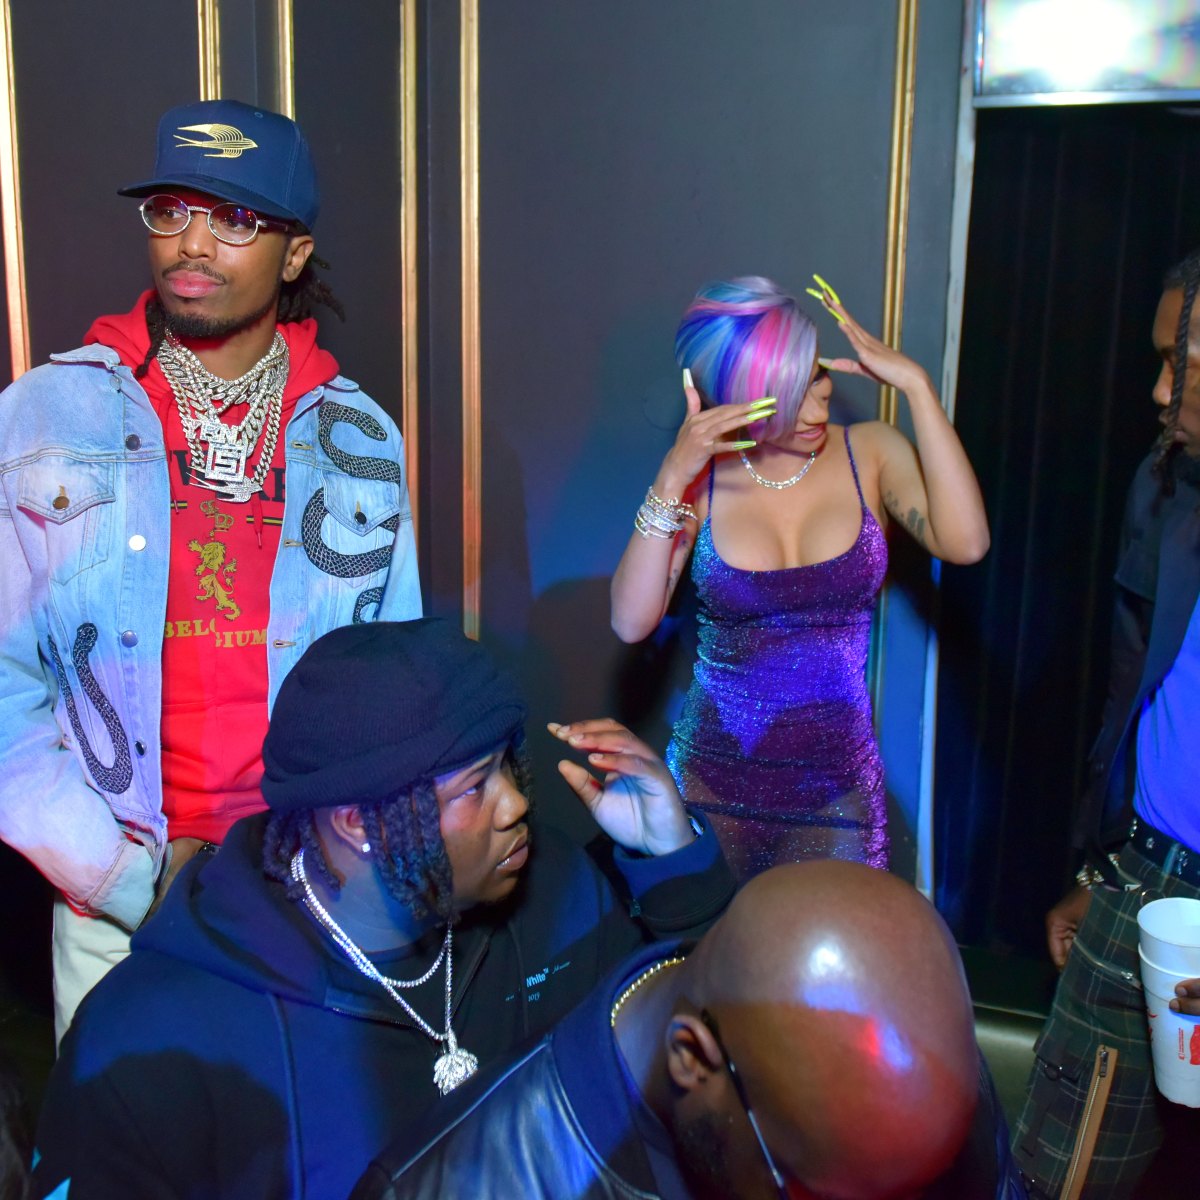 Cardi B & Fiance Offset Couple Up for Pre-Super Bowl Party: Photo 4026909, Cardi  B, Migos, Offset, Post Malone Photos